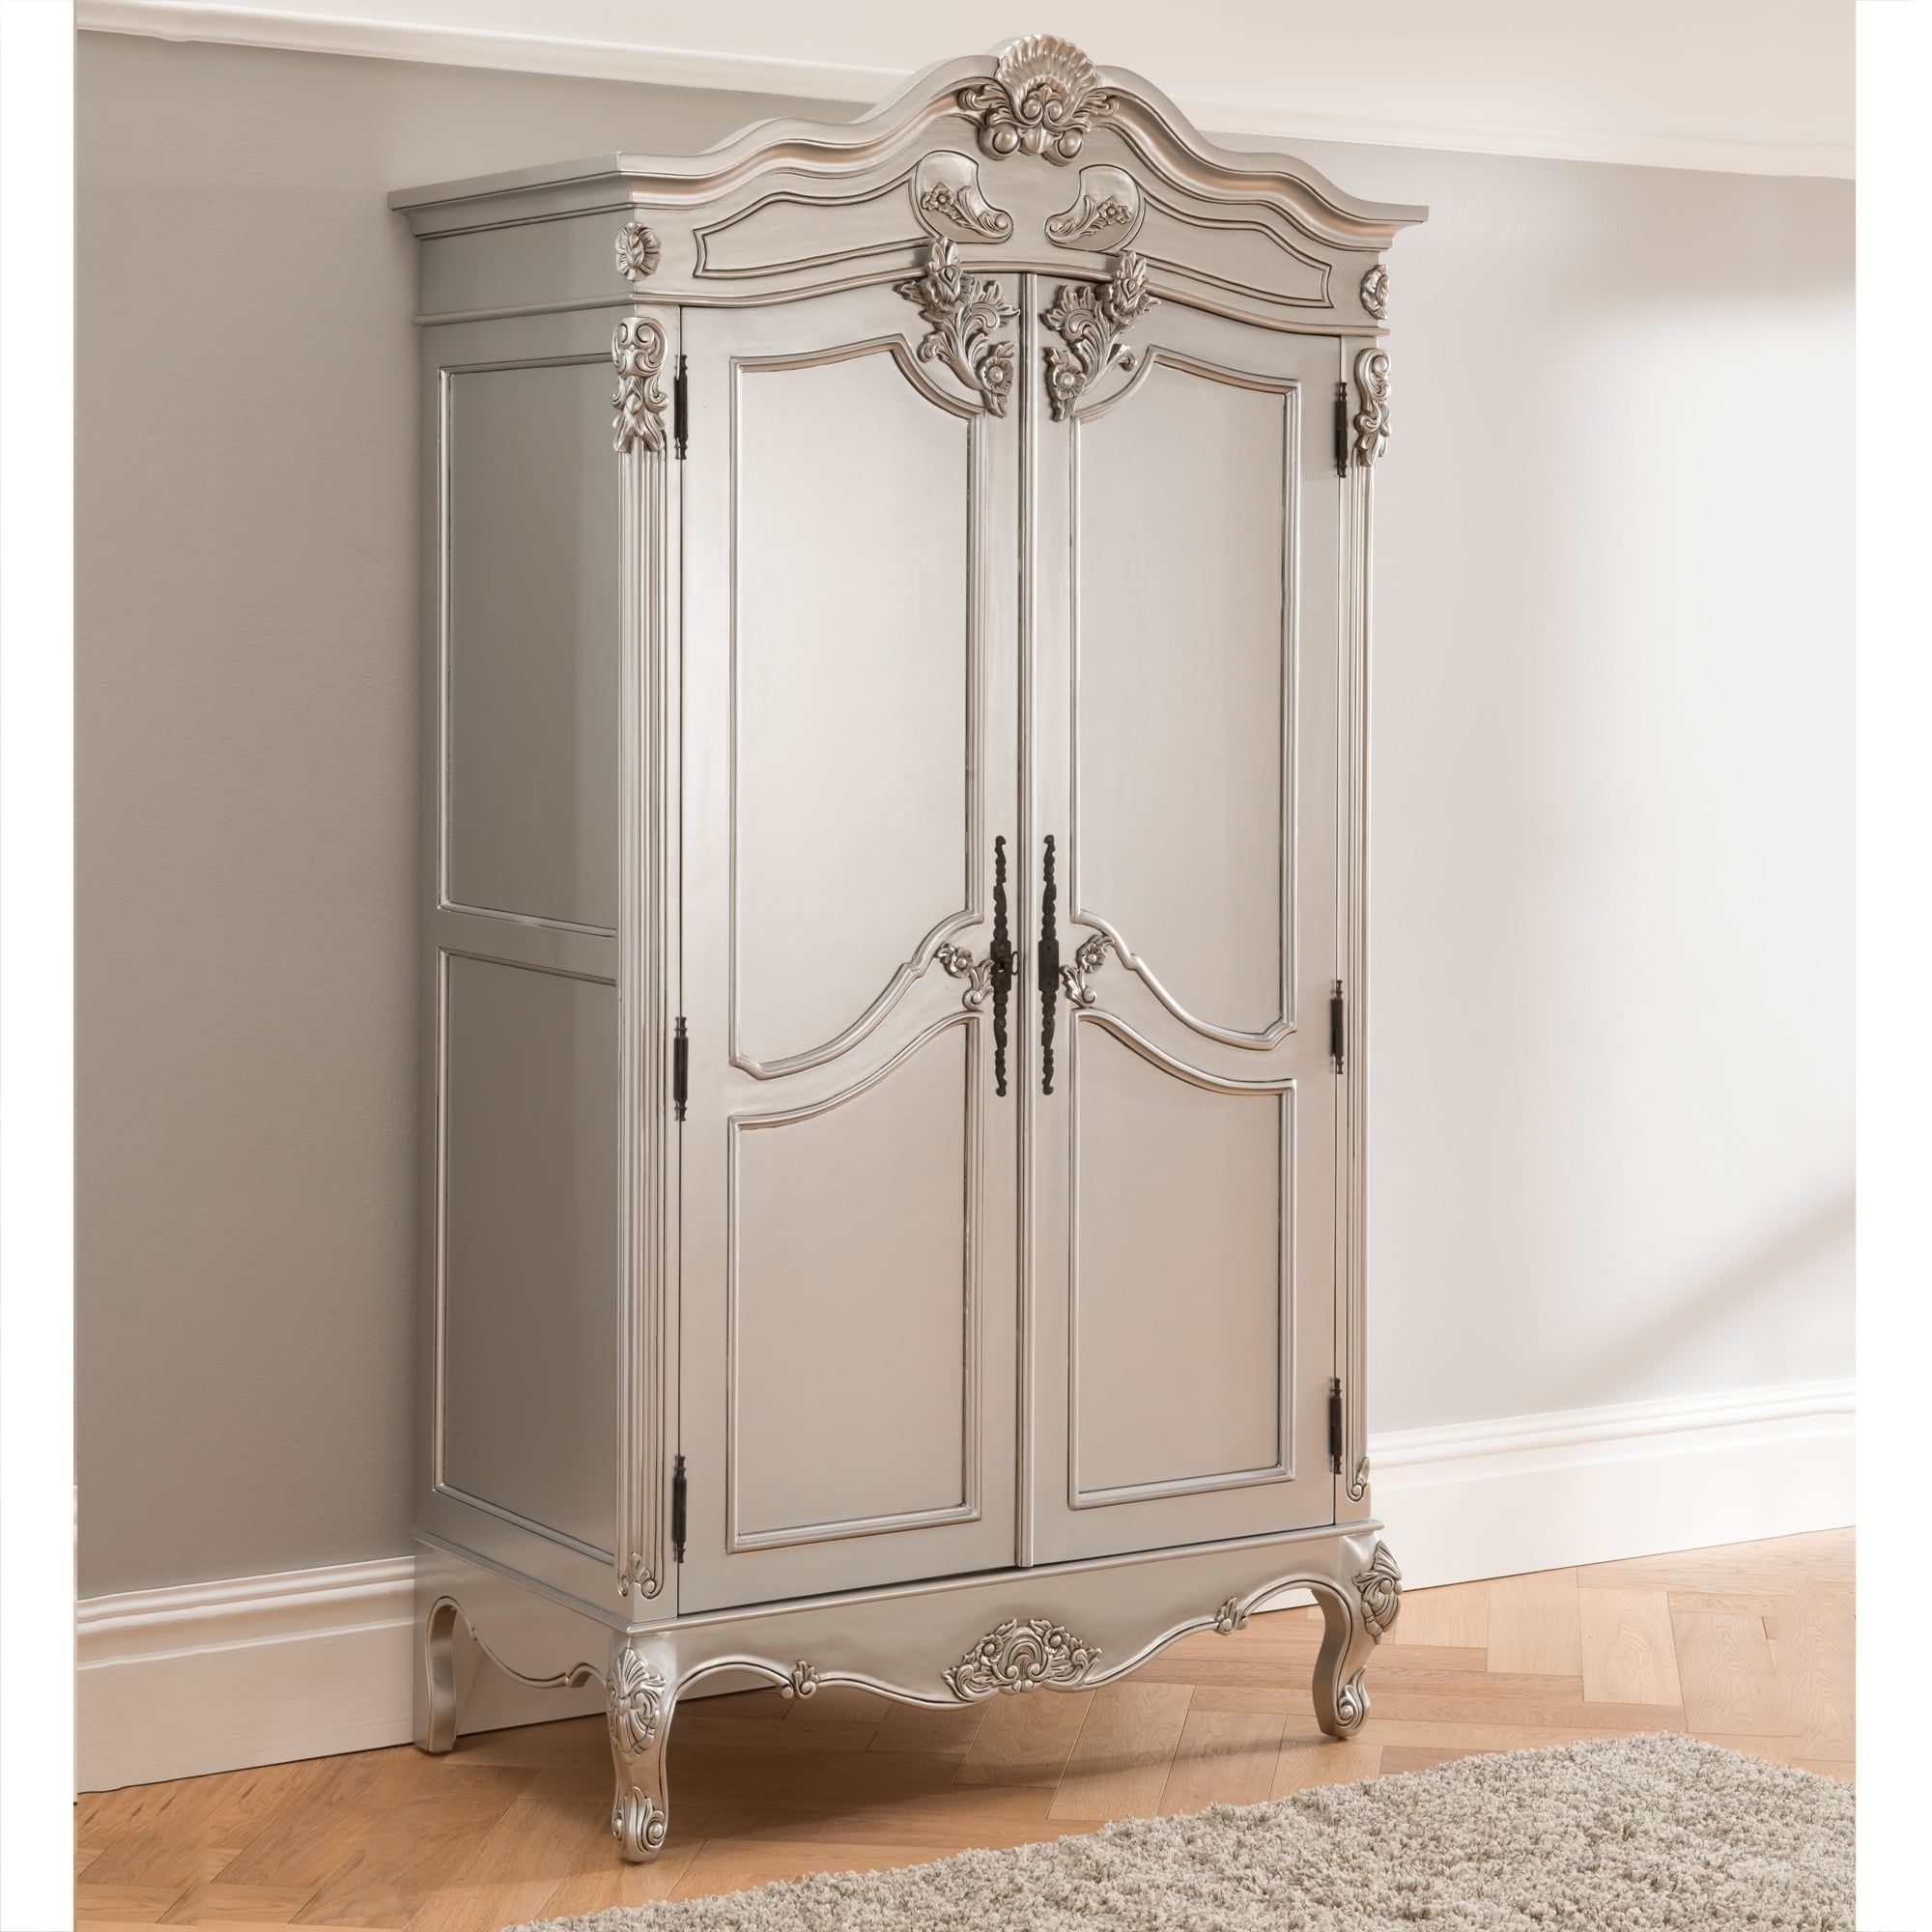 Baroque Antique French Wardrobe Works Exceptional Alongside Our Pertaining To Most Recent Silver French Wardrobes (View 8 of 15)